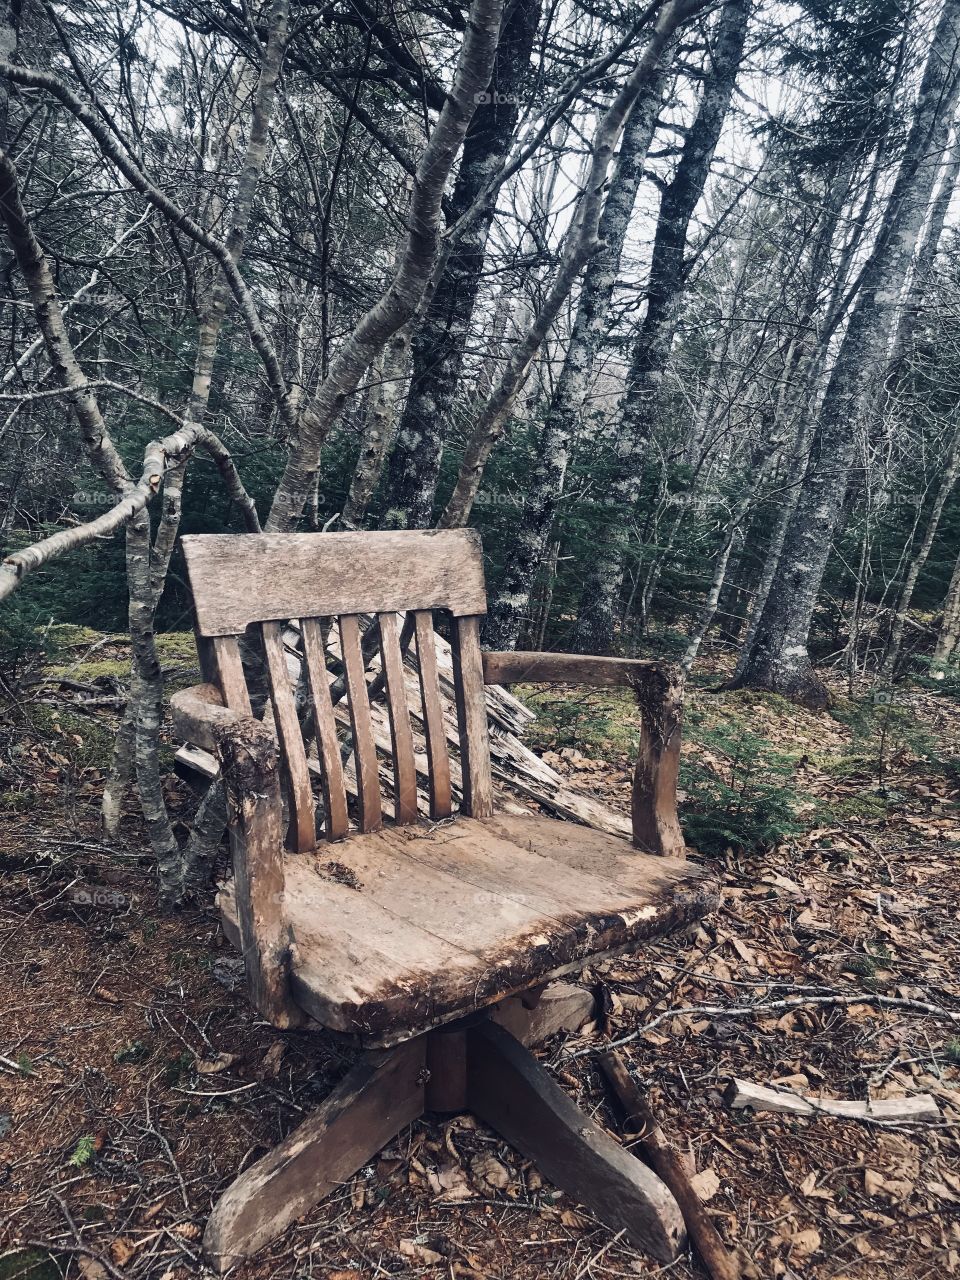 Weathered wood chair found in the forest. 